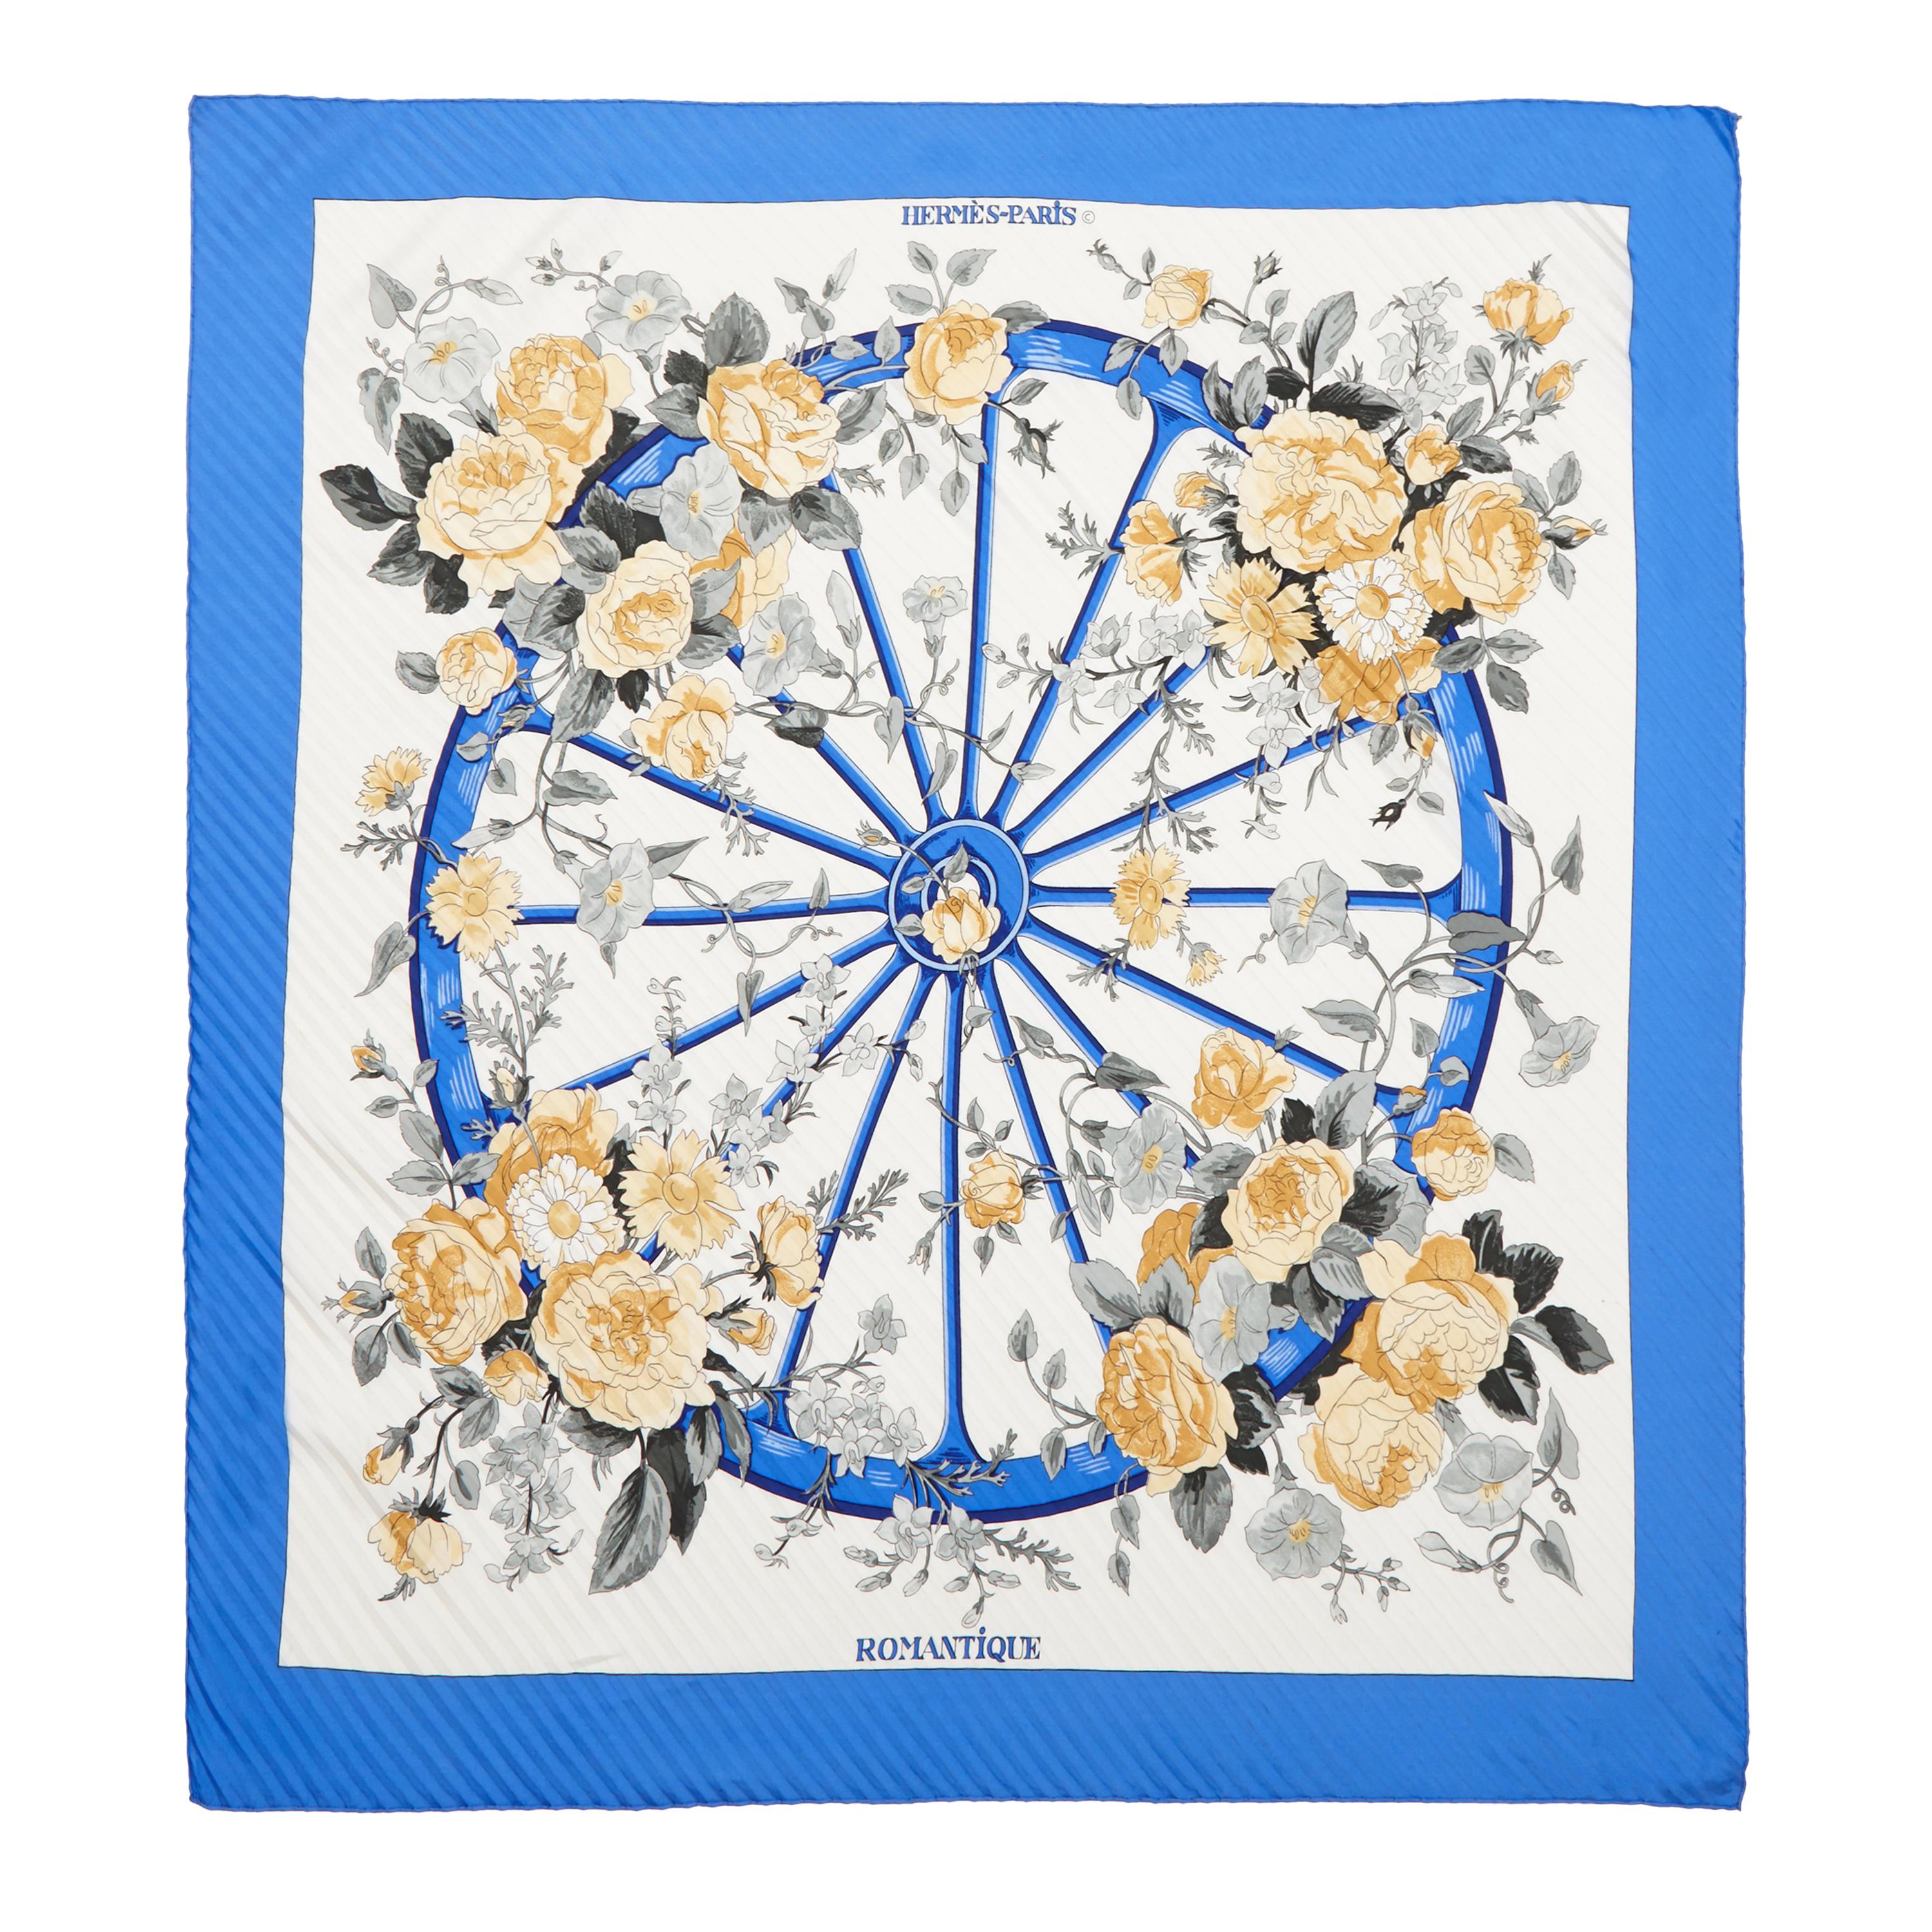 1970s Reissue ‘Romantique’ Hermes Pleated Silk Scarf in Blue